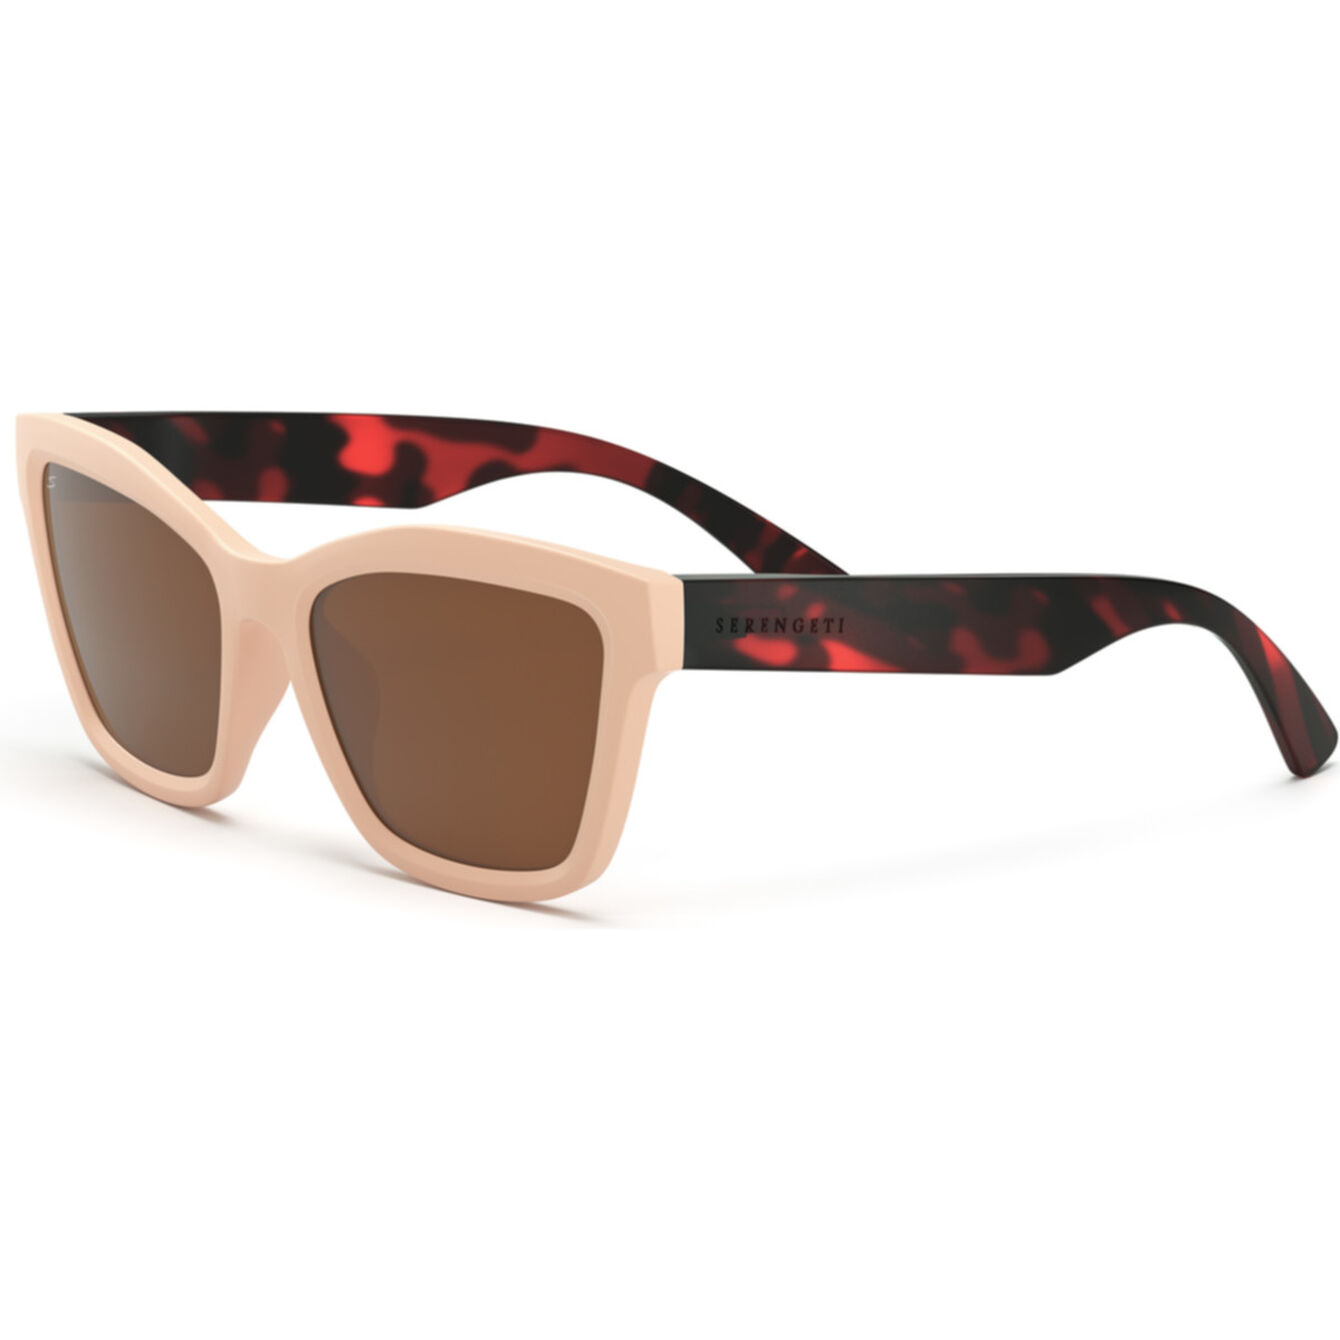 Rolla_Matte White Matte Classic Tortoise Temples-Saturn Polarized Drivers Cat 2 to 3-03.jpg